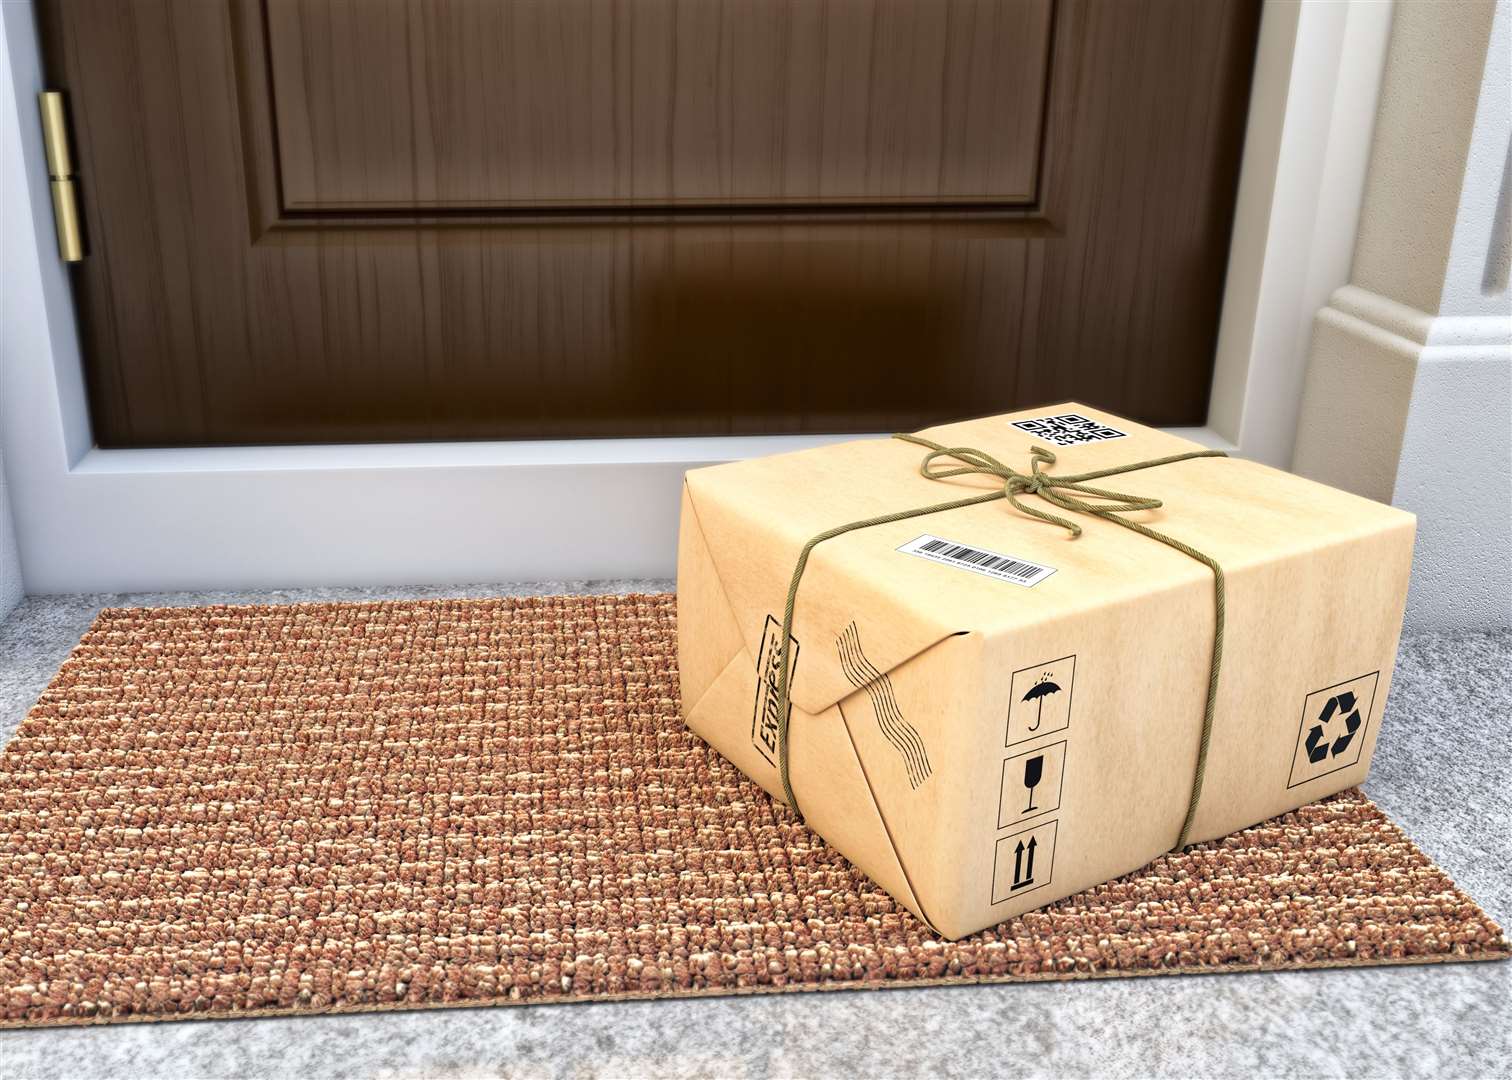 Delivery companies and couriers are now getting ready for their busiest time of the year. Image: iStock stock image.